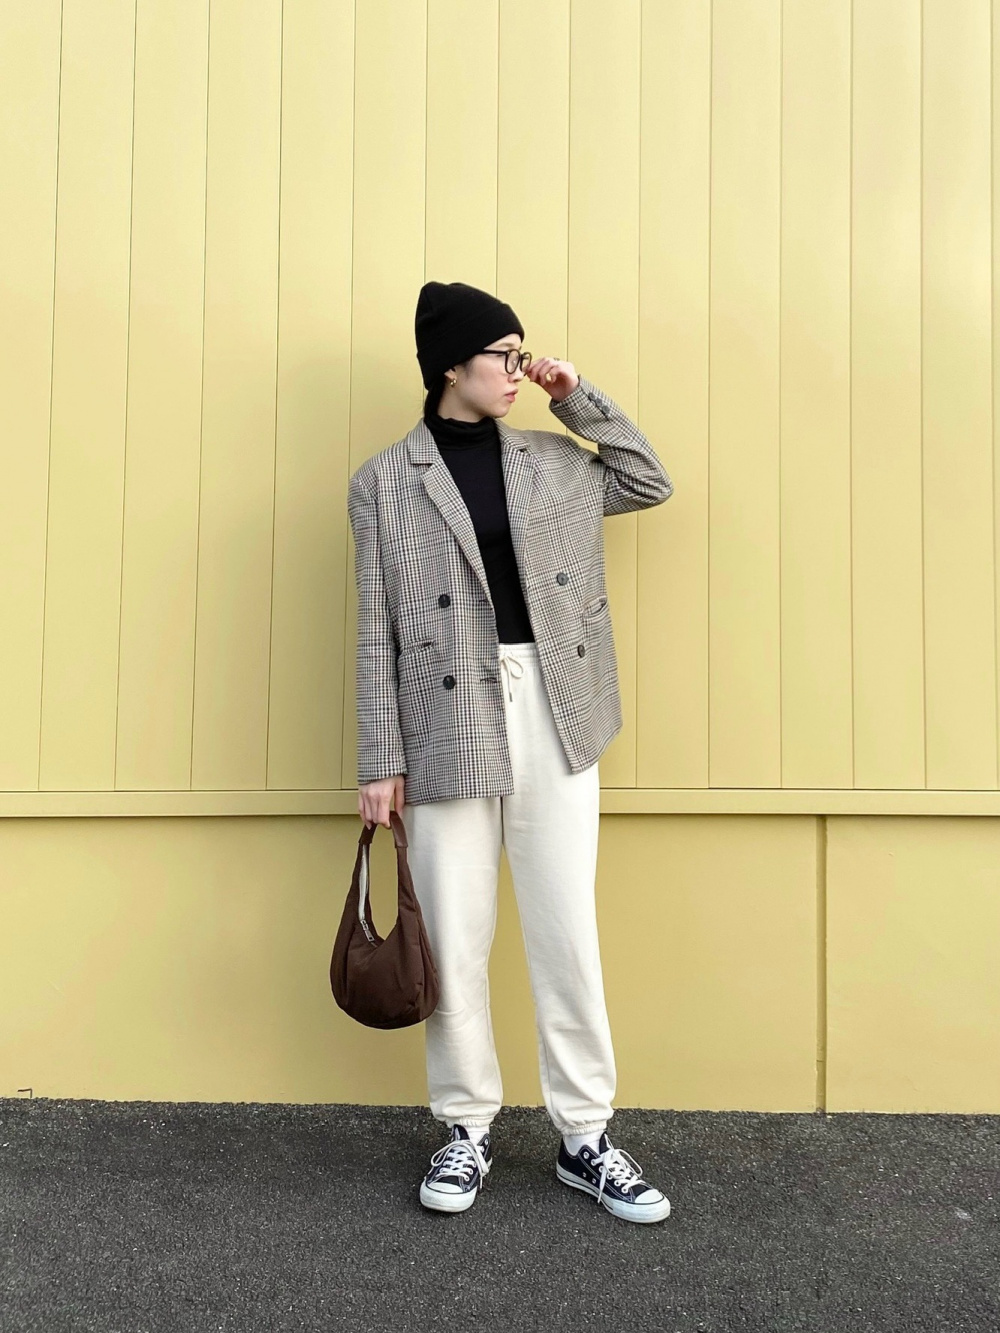 Check styling ideas for「Sweatpants、PUFFTECH Short Blouson (HEATTECH,  Relaxed Fit)」